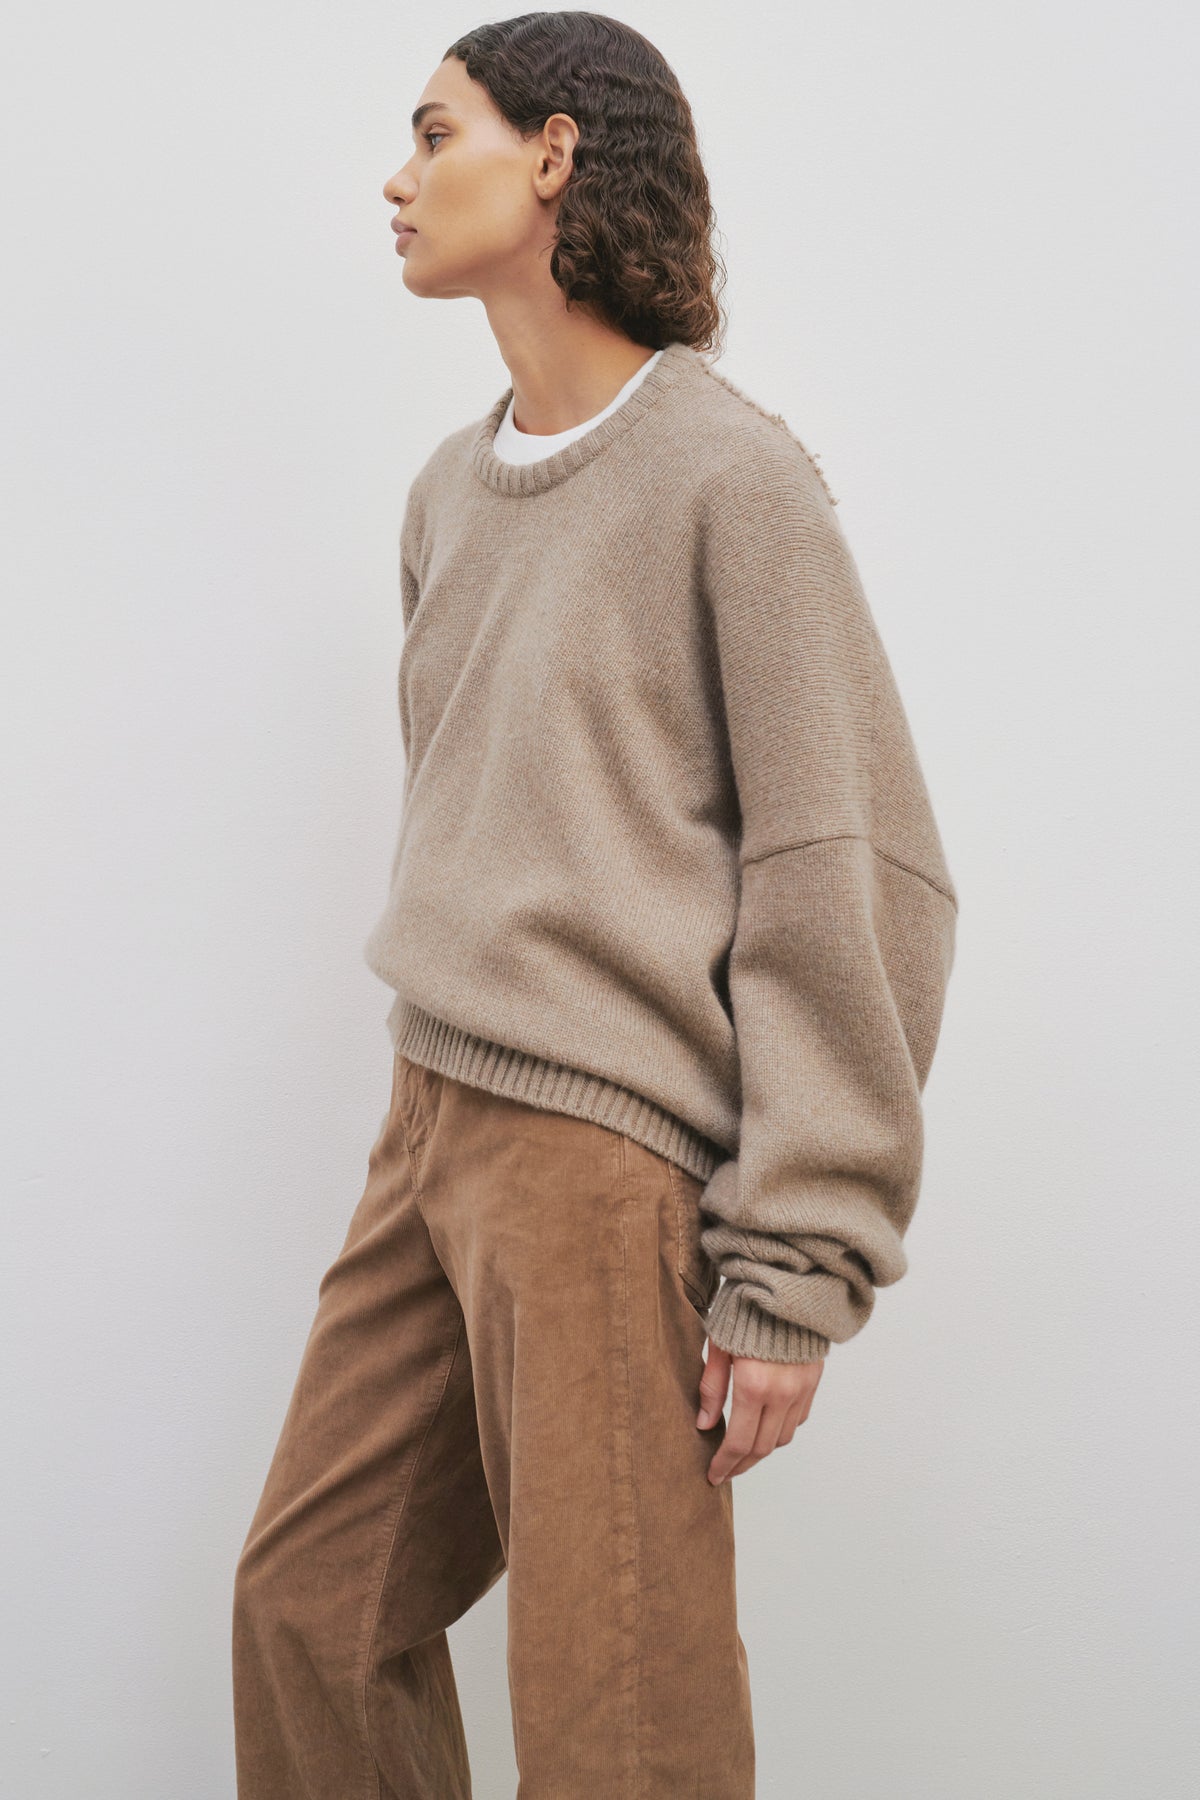 Dafna Top in Cashmere and Mohair